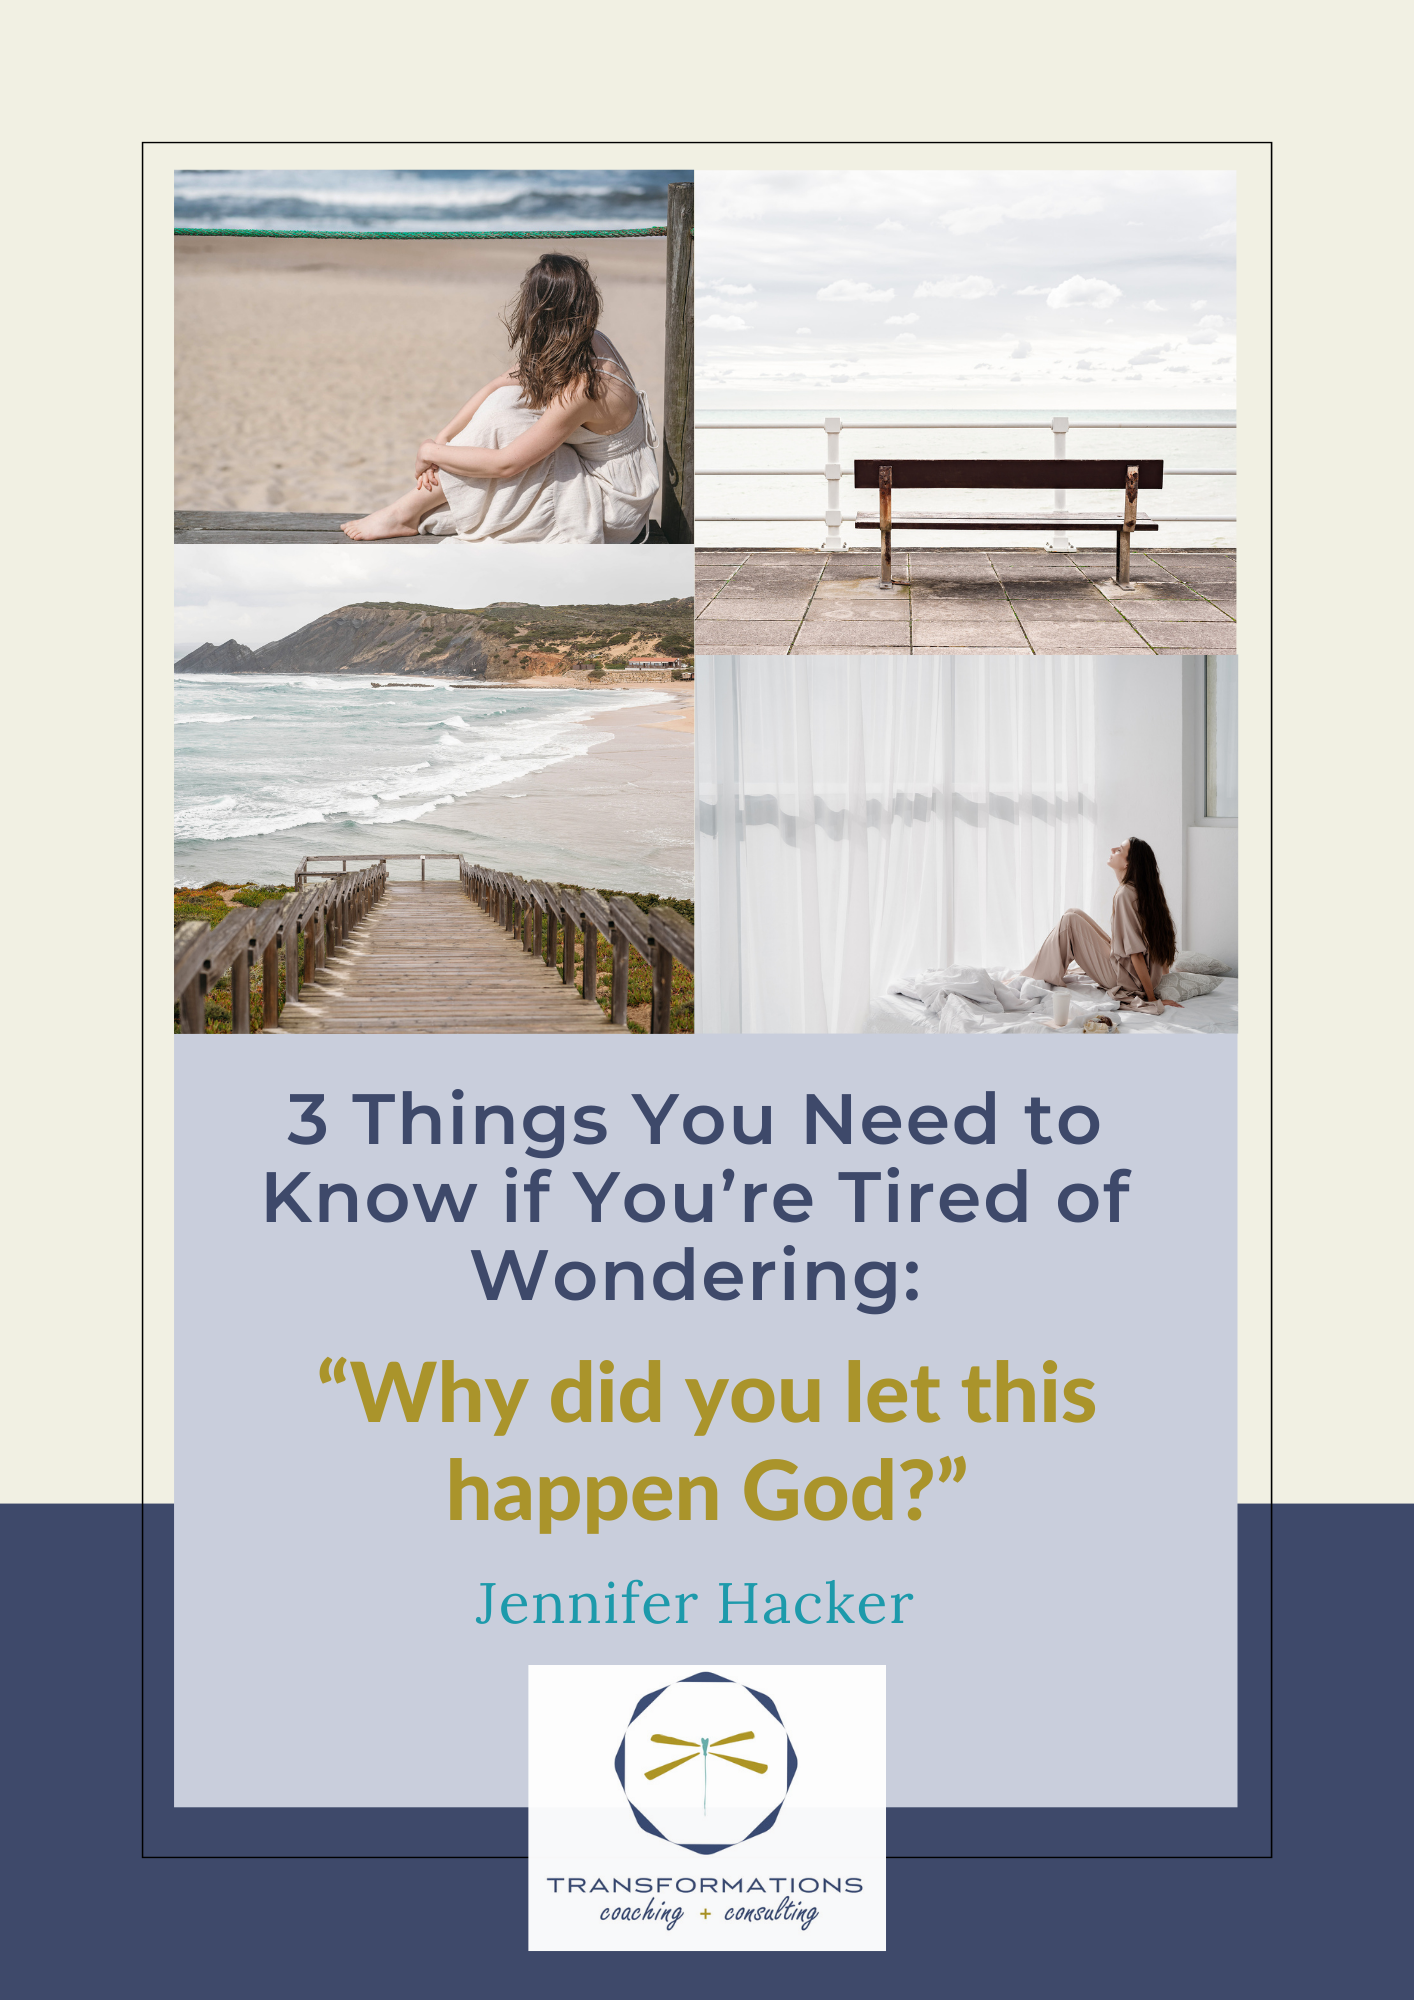 3 things you need to know if you're tired of wondering "why did you let this happen God?"